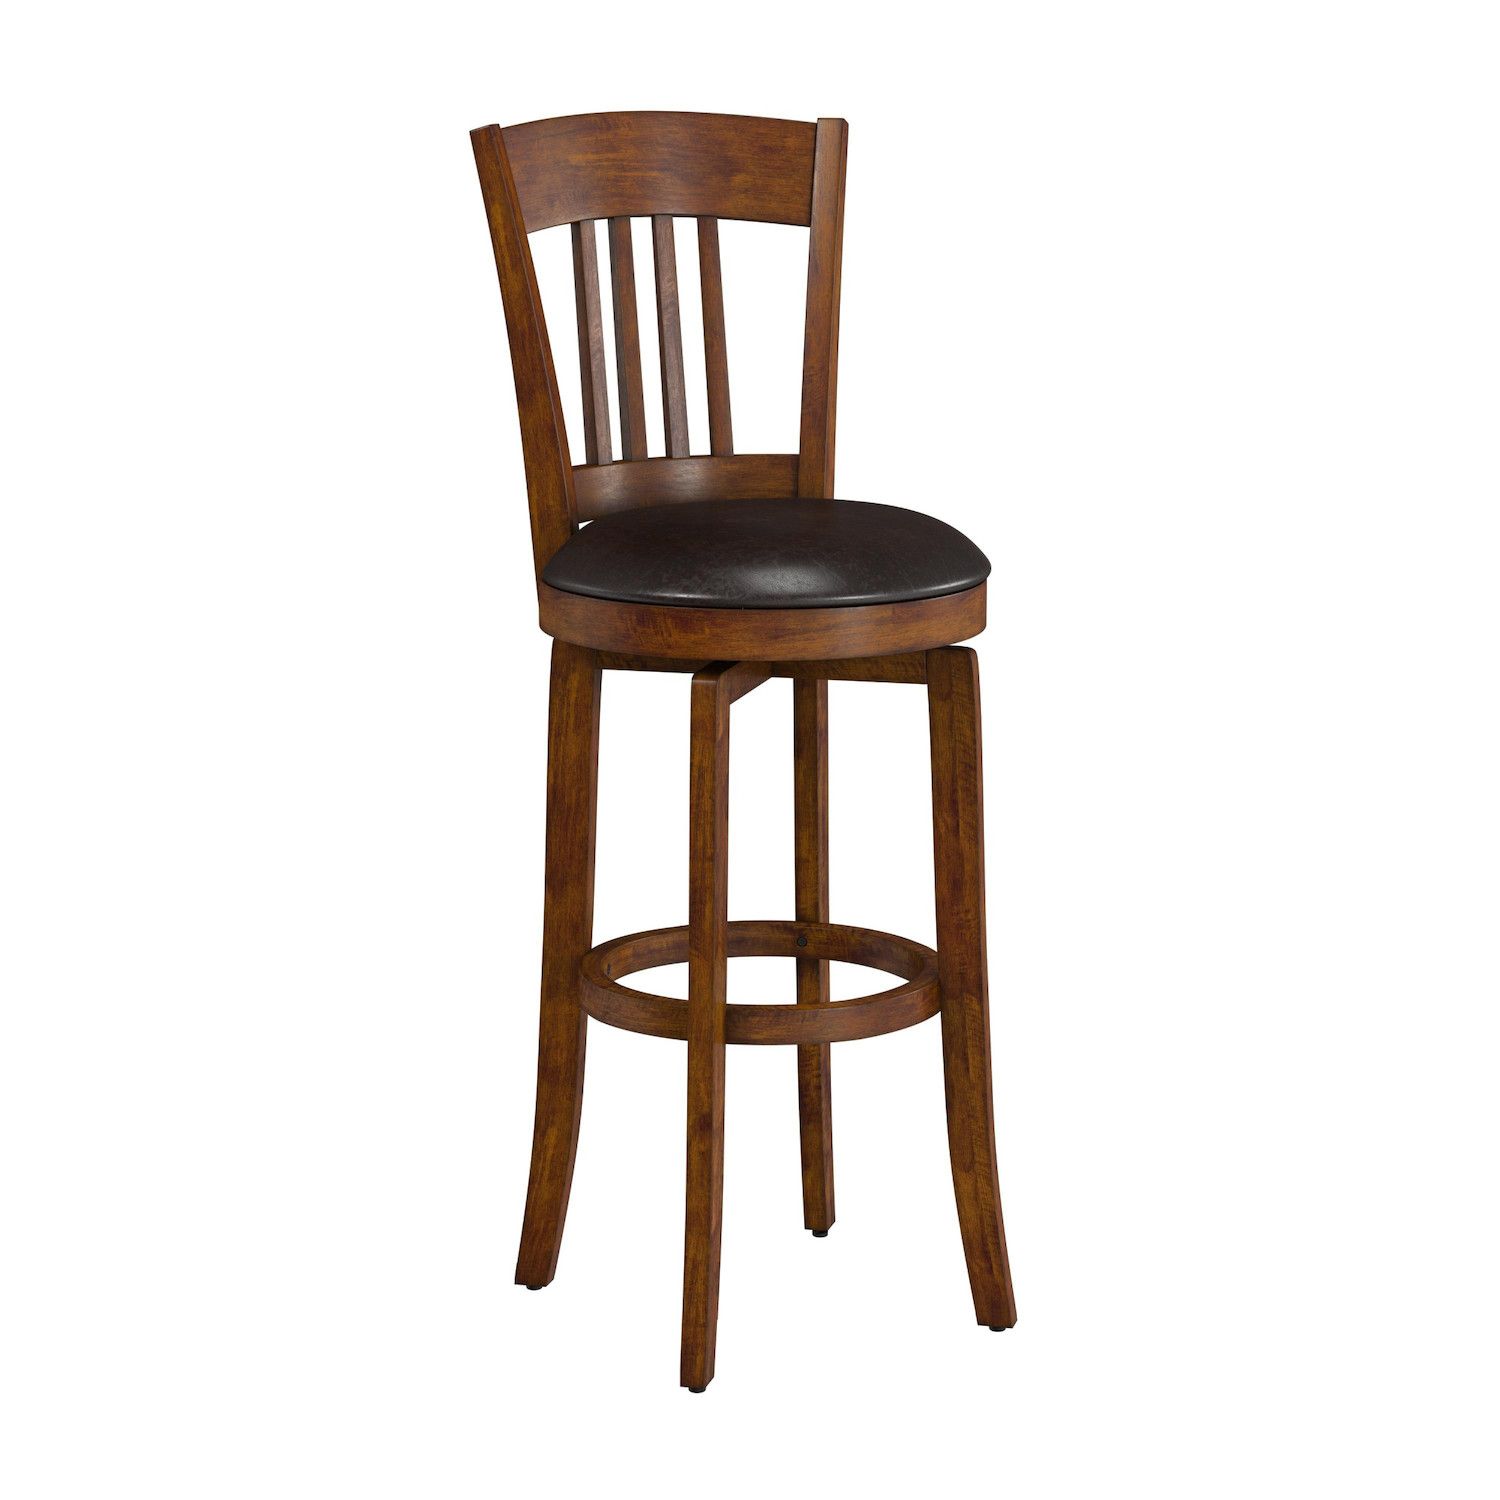 Image for Hillsdale Furniture Canton Swivel Bar Stool at Kohl's.